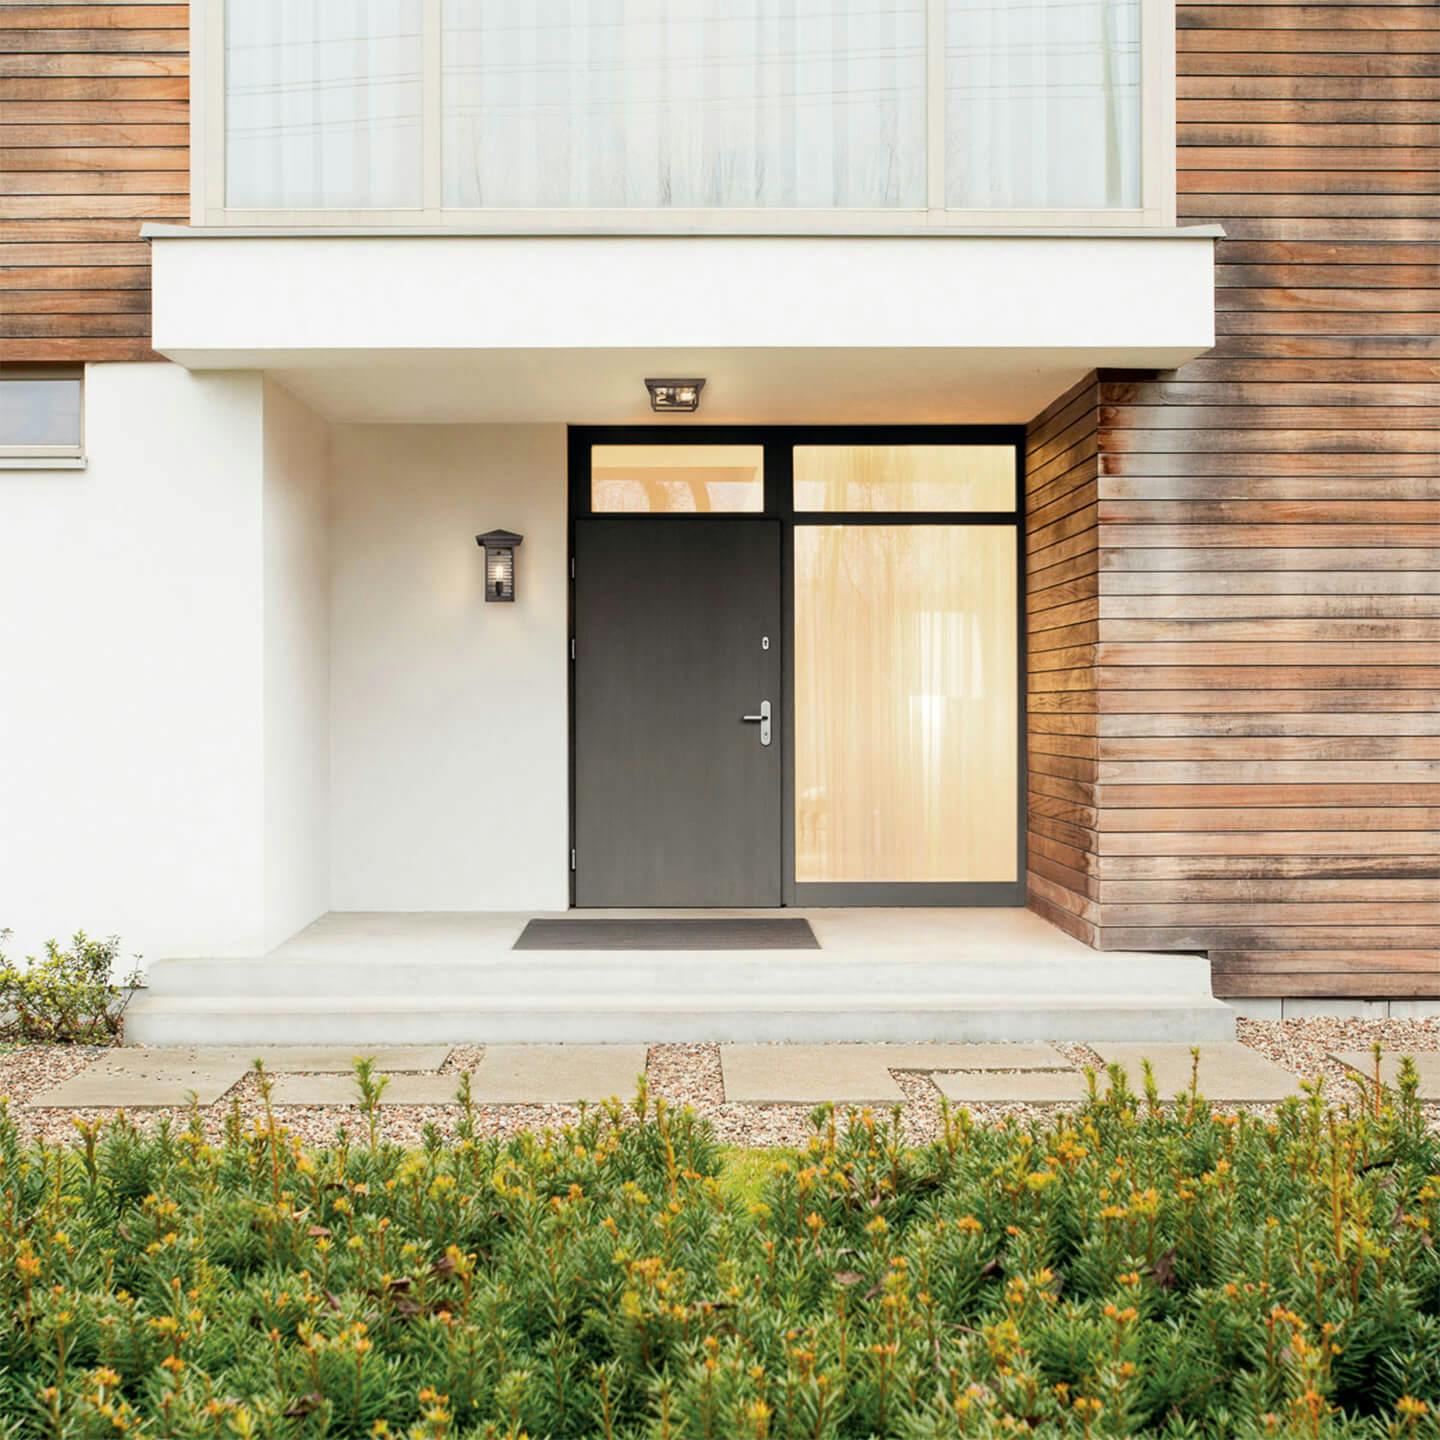 Exterior image of a front entrance of a modern house with concrete and wood finishes with Wayland exterior wall light next to the front door and a Wayland flush mount above the entry way 